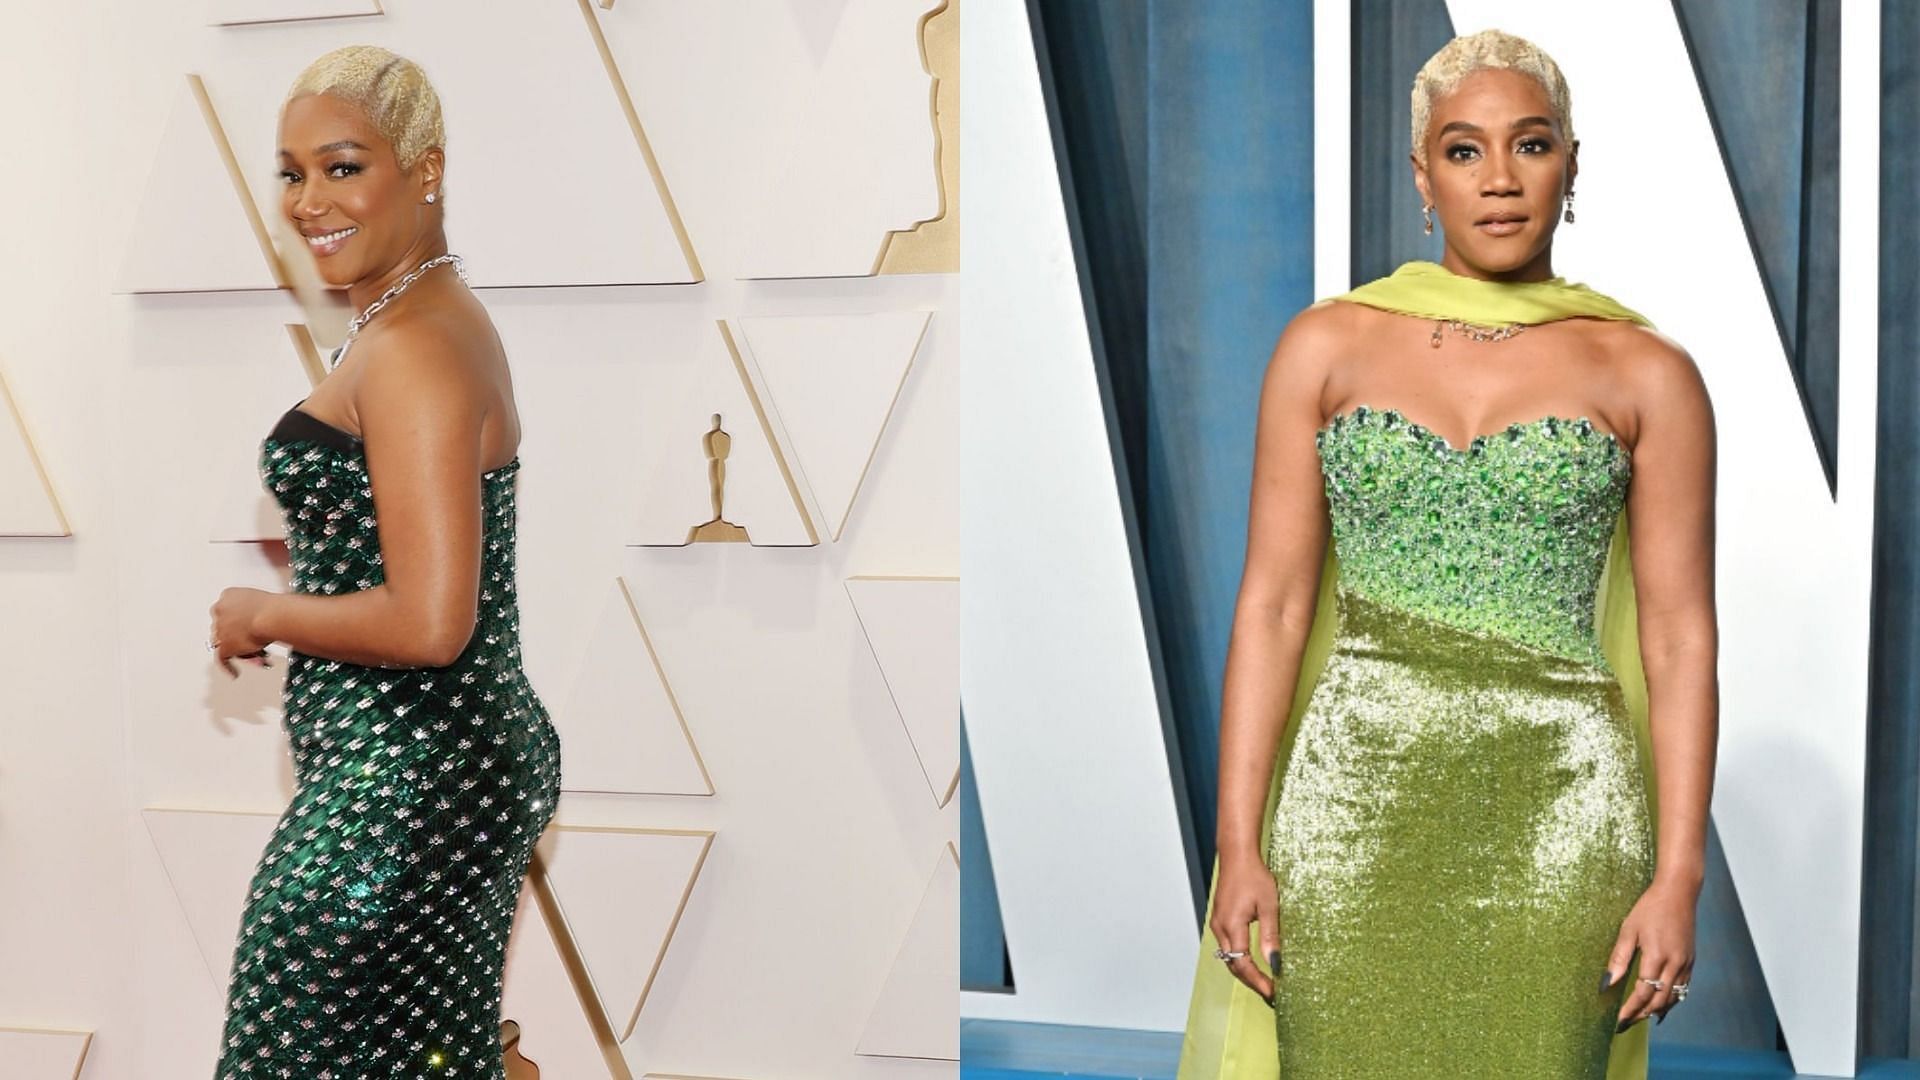 Tiffany Haddish corrected a reporter for mistaking her gown for a costume at the Vanity Fair Oscars Party (Image via Mike Coppola/Getty Images and Rich Fury/Getty Images)